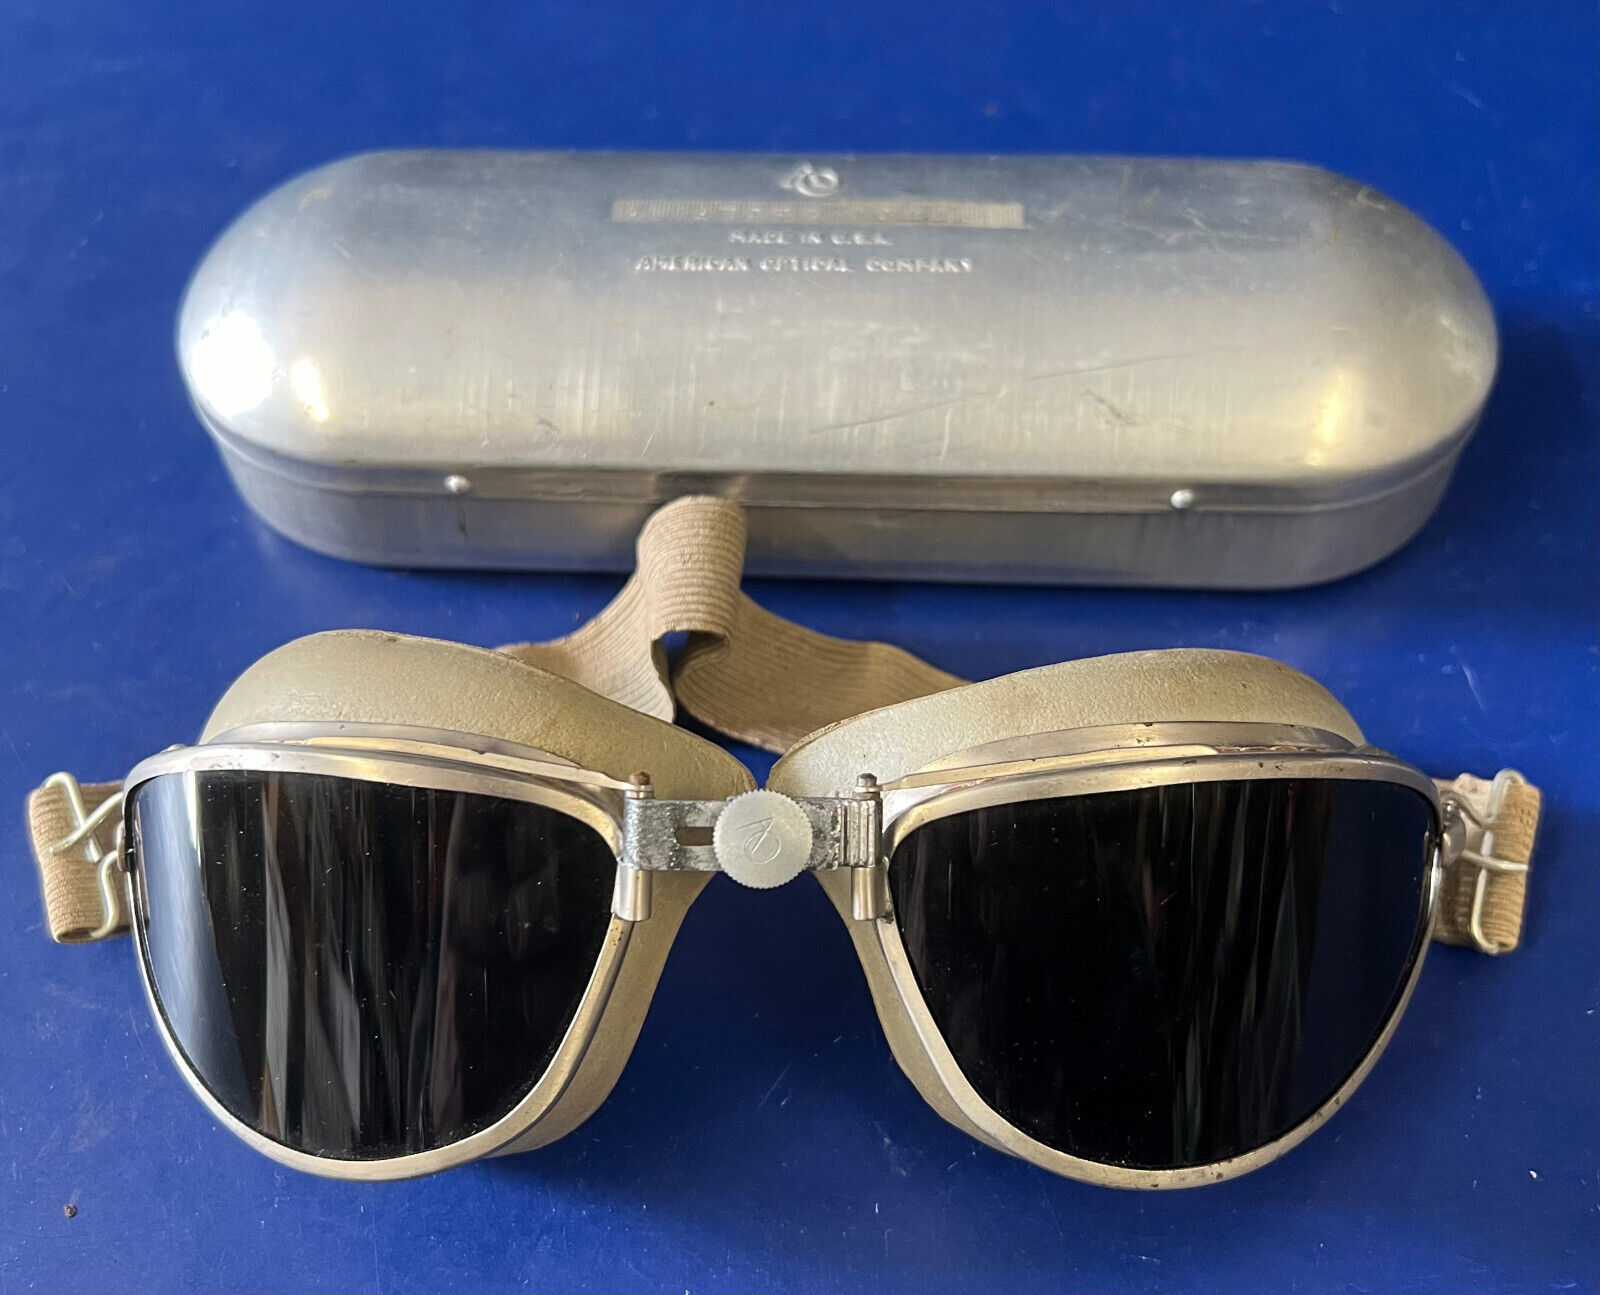 AMERICAN OPTICAL SKY LOOKOUT FLYING GOGGLES-MINT CONDITION